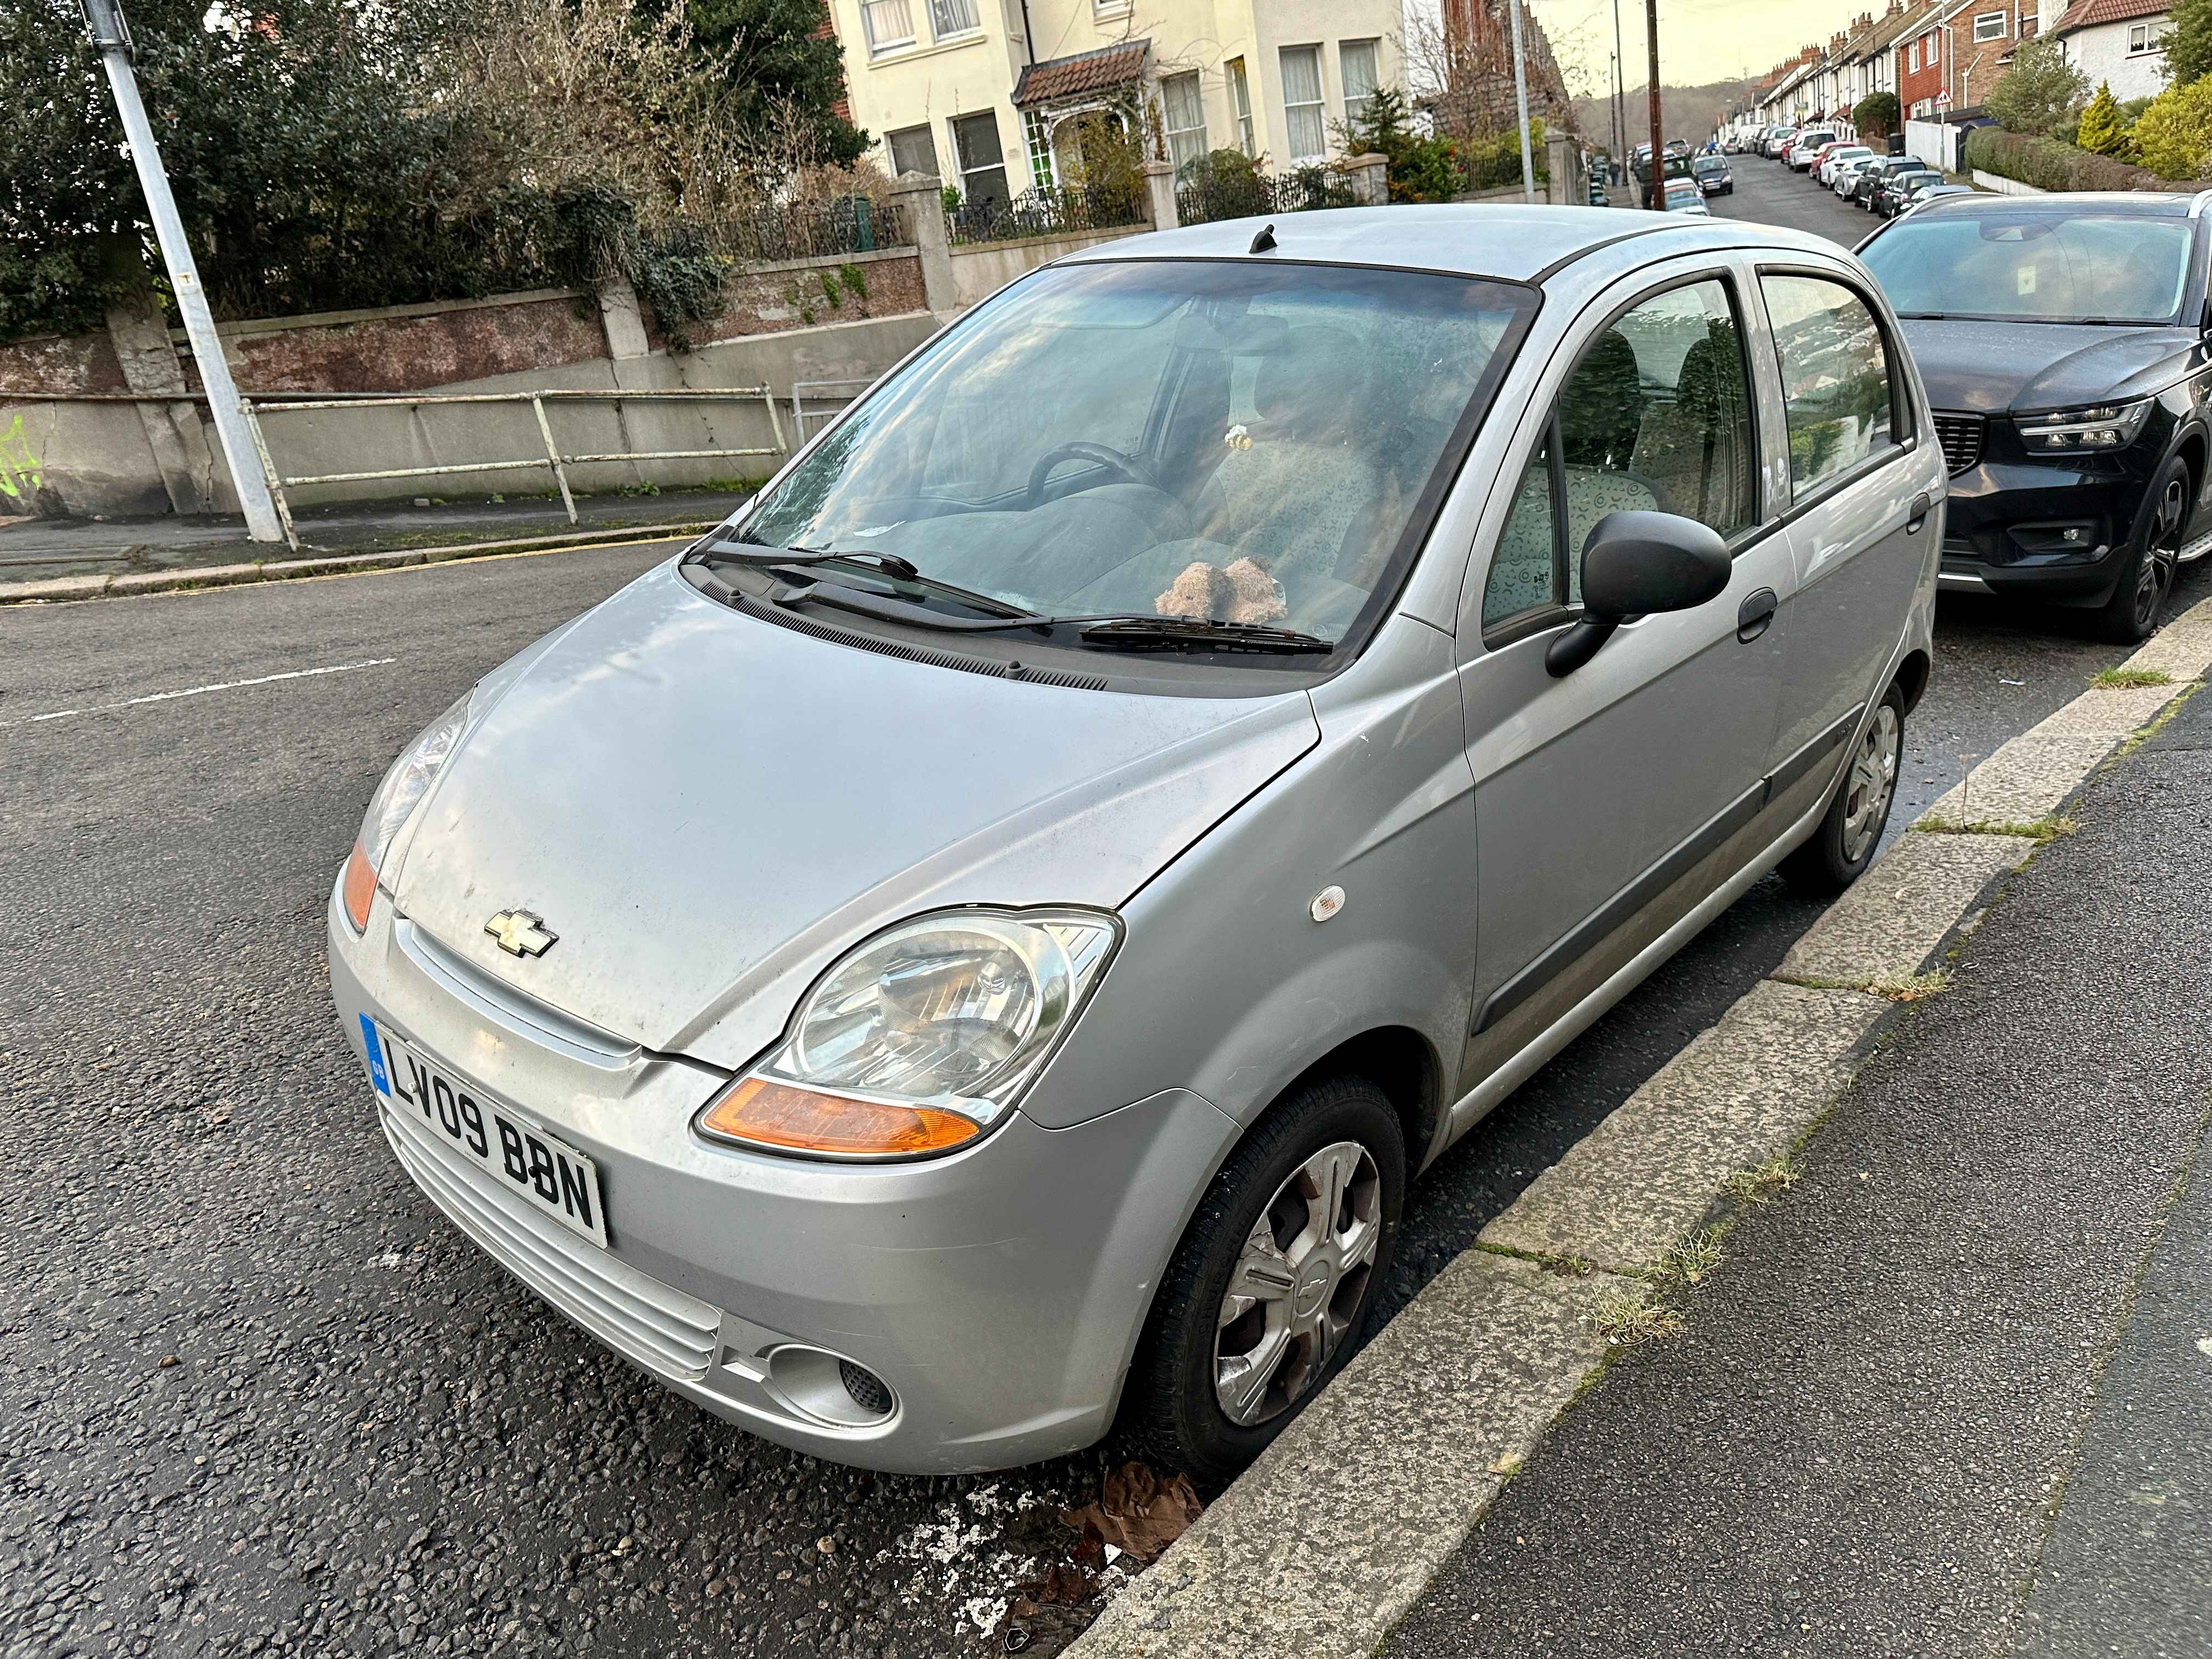 Photograph of LV09 BBN - a Silver Chevrolet Matiz parked in Hollingdean by a non-resident. The second of three photographs supplied by the residents of Hollingdean.